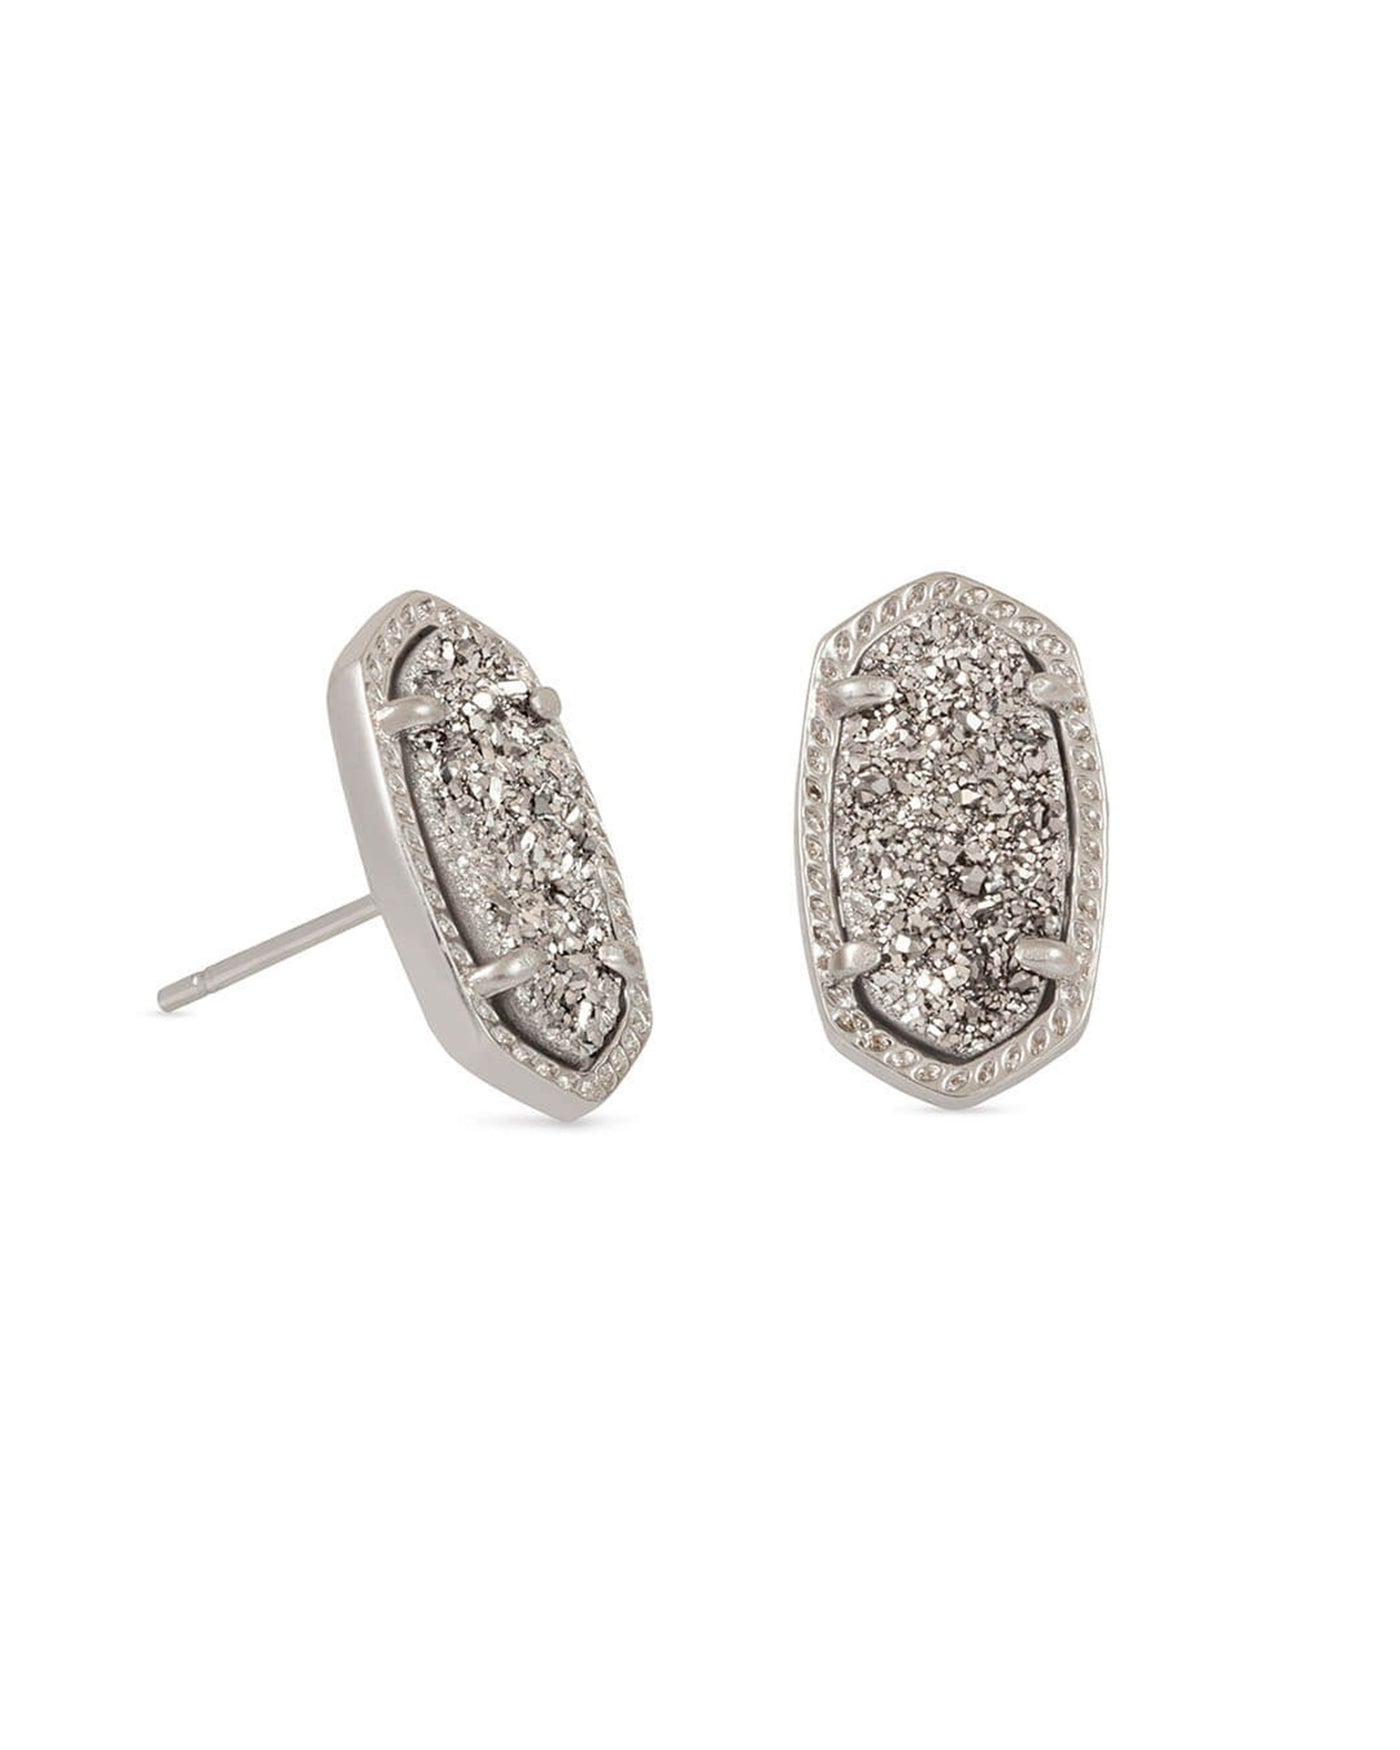 Ellie Stud Earrings Silver Platinum Drusy on white background, front view.